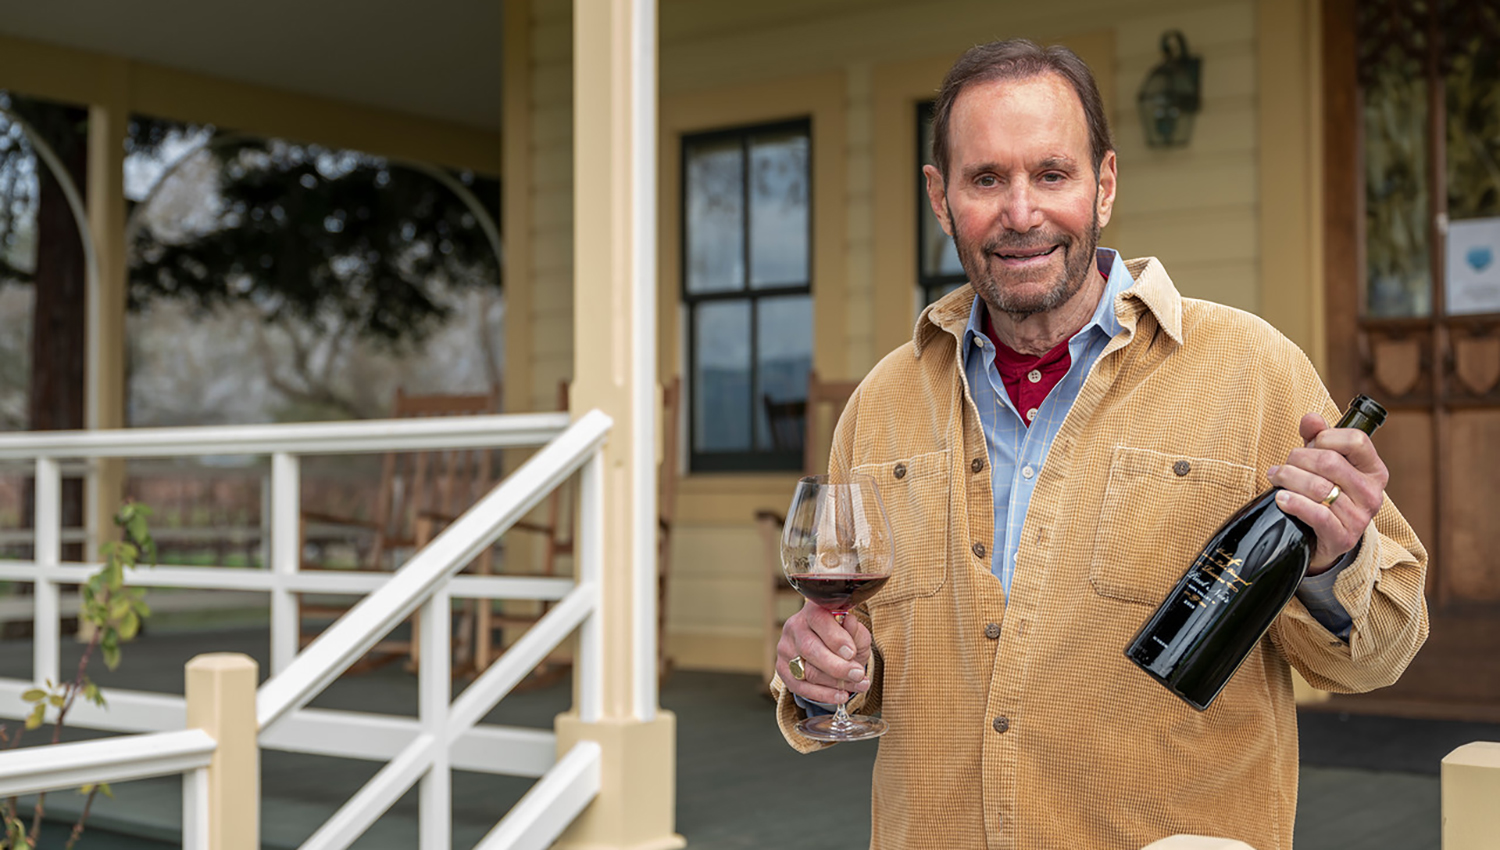 Andy Beckstoffer holding a bottle of wine